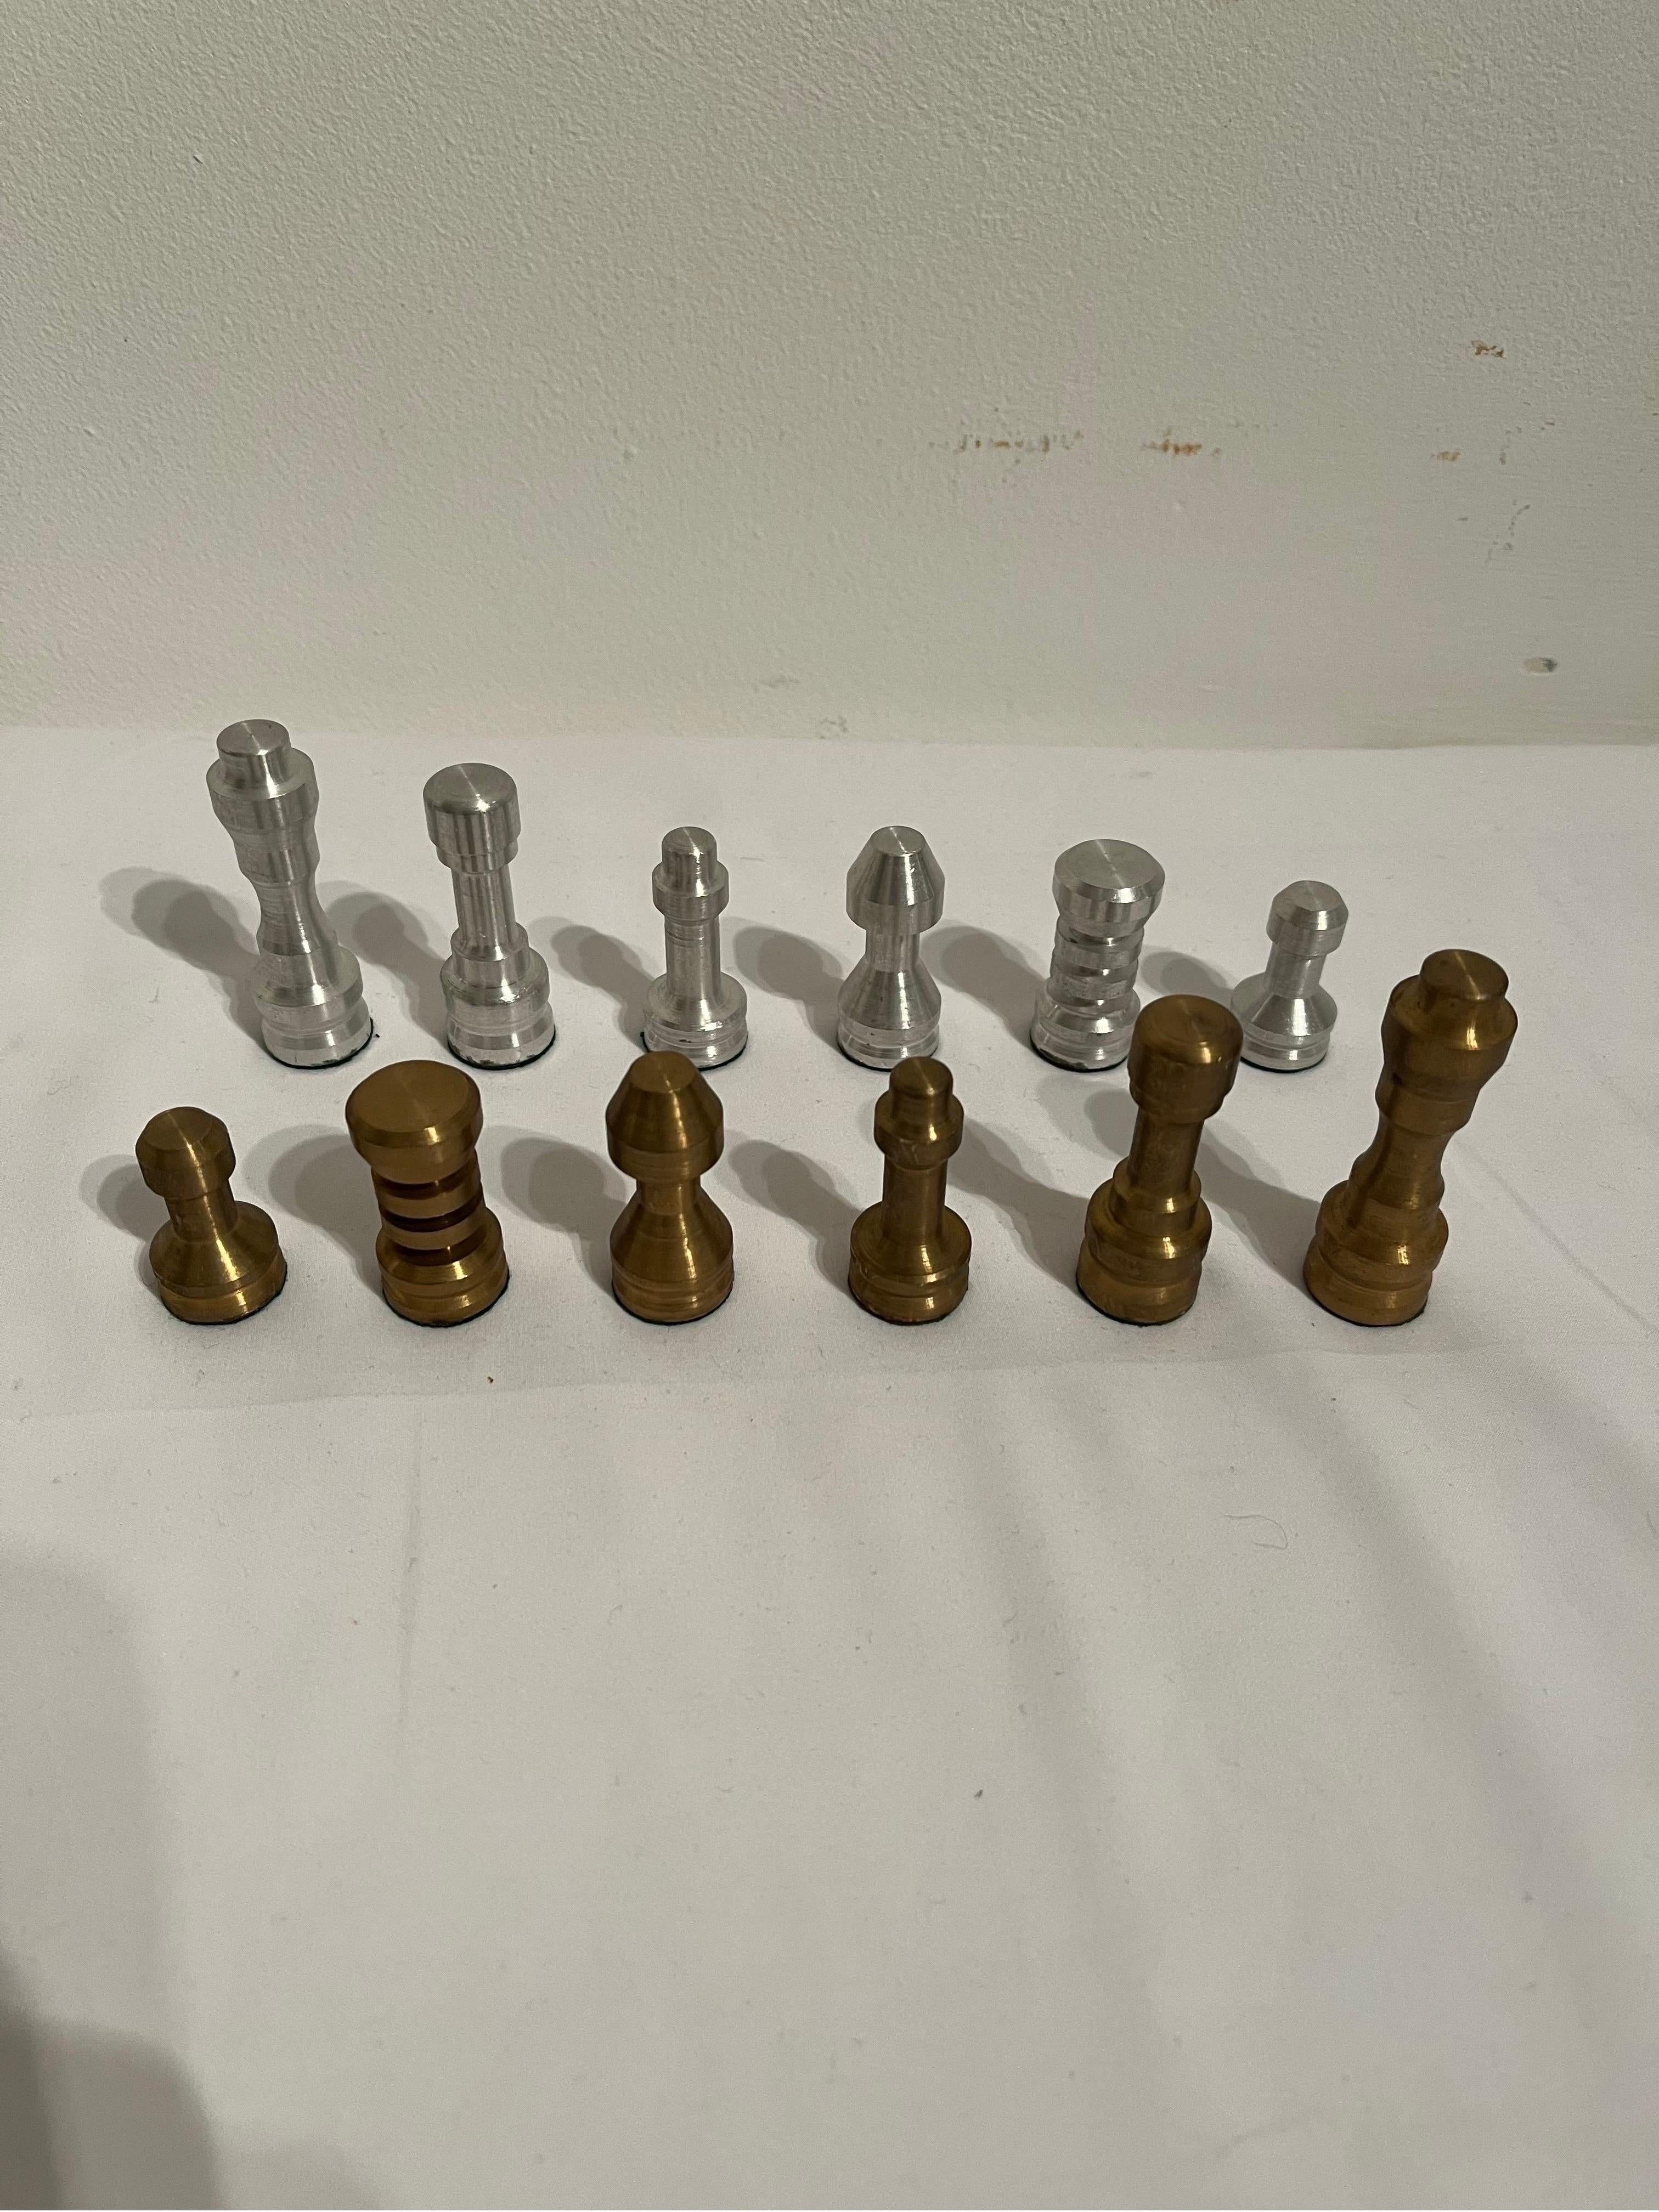 Aluminum Machine Age Hand Lathed Aluminium And Brass Chess Pieces Set c1940s For Sale